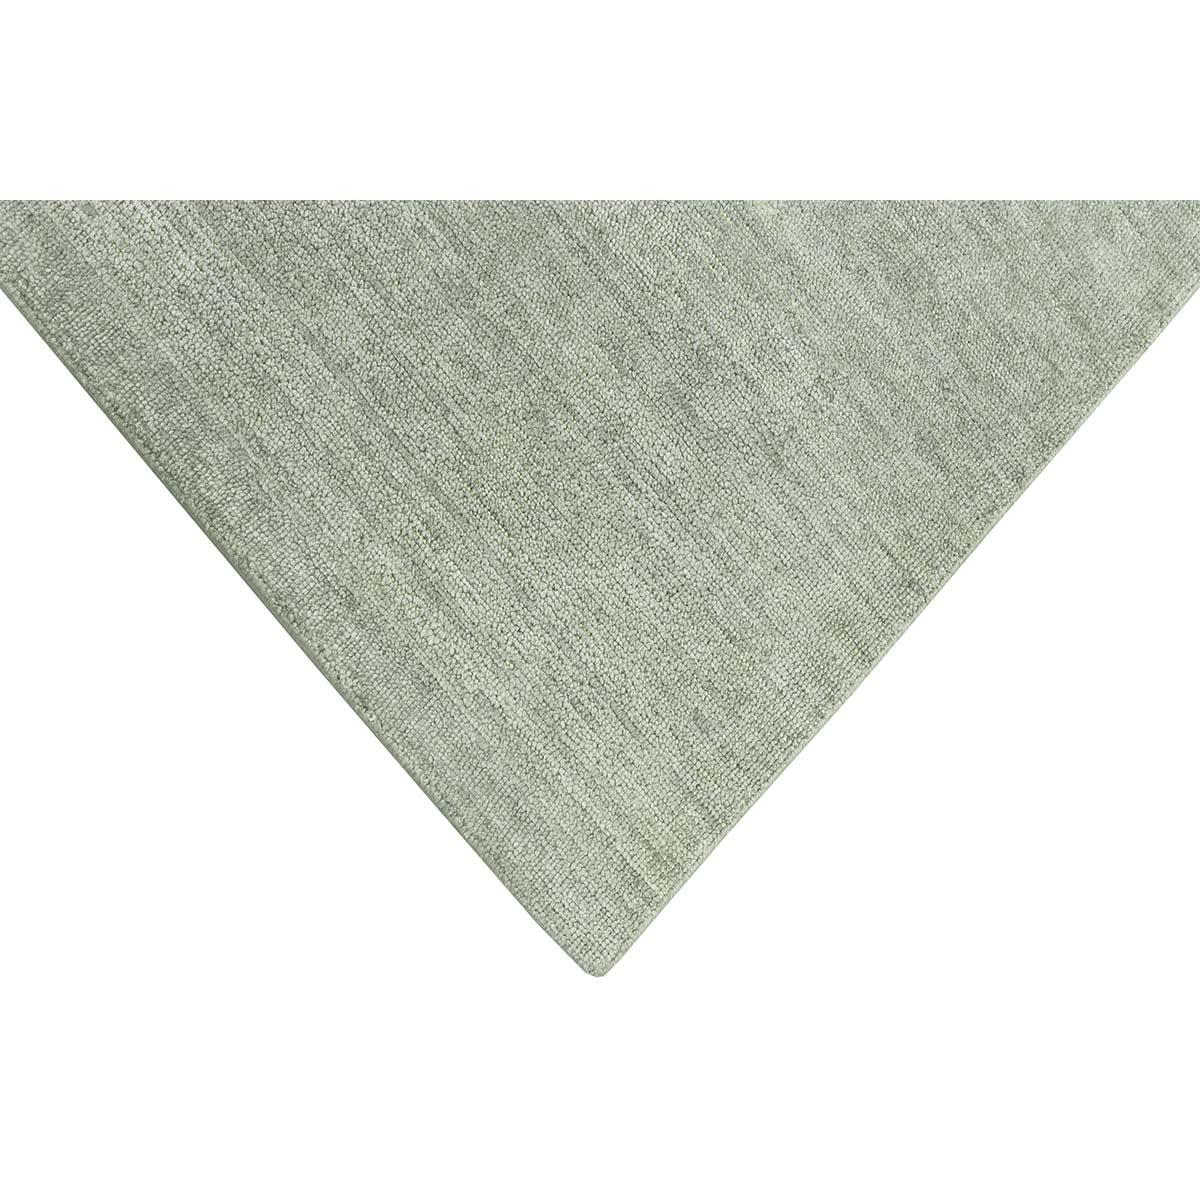 Indian Luxurious Hand Loomed Light Green Area Rug For Sale